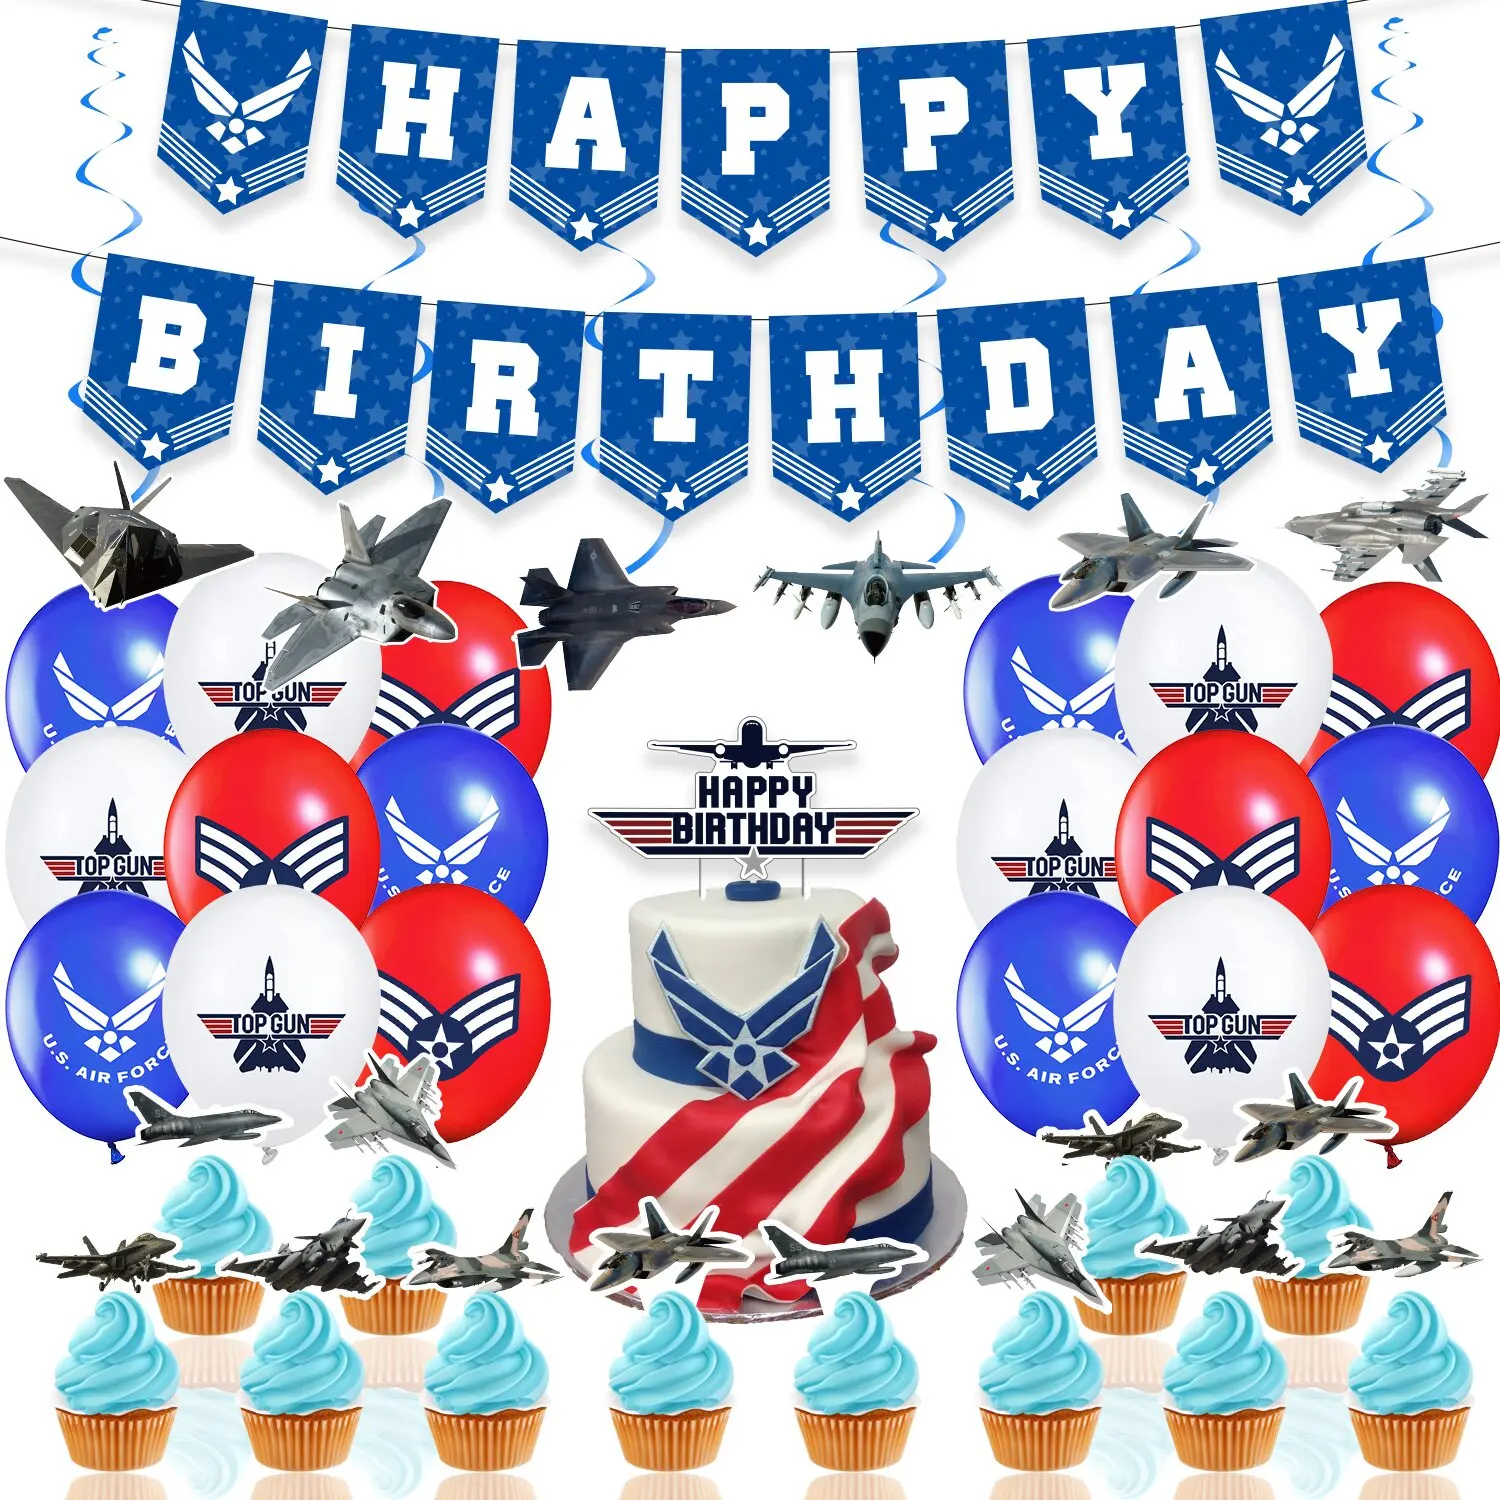 

Cheereveal U.S. Air Force Themed Birthday Party Decorations Supplies Fighter Aircraft Balloons Banner Cake Topper Hanging Swirl